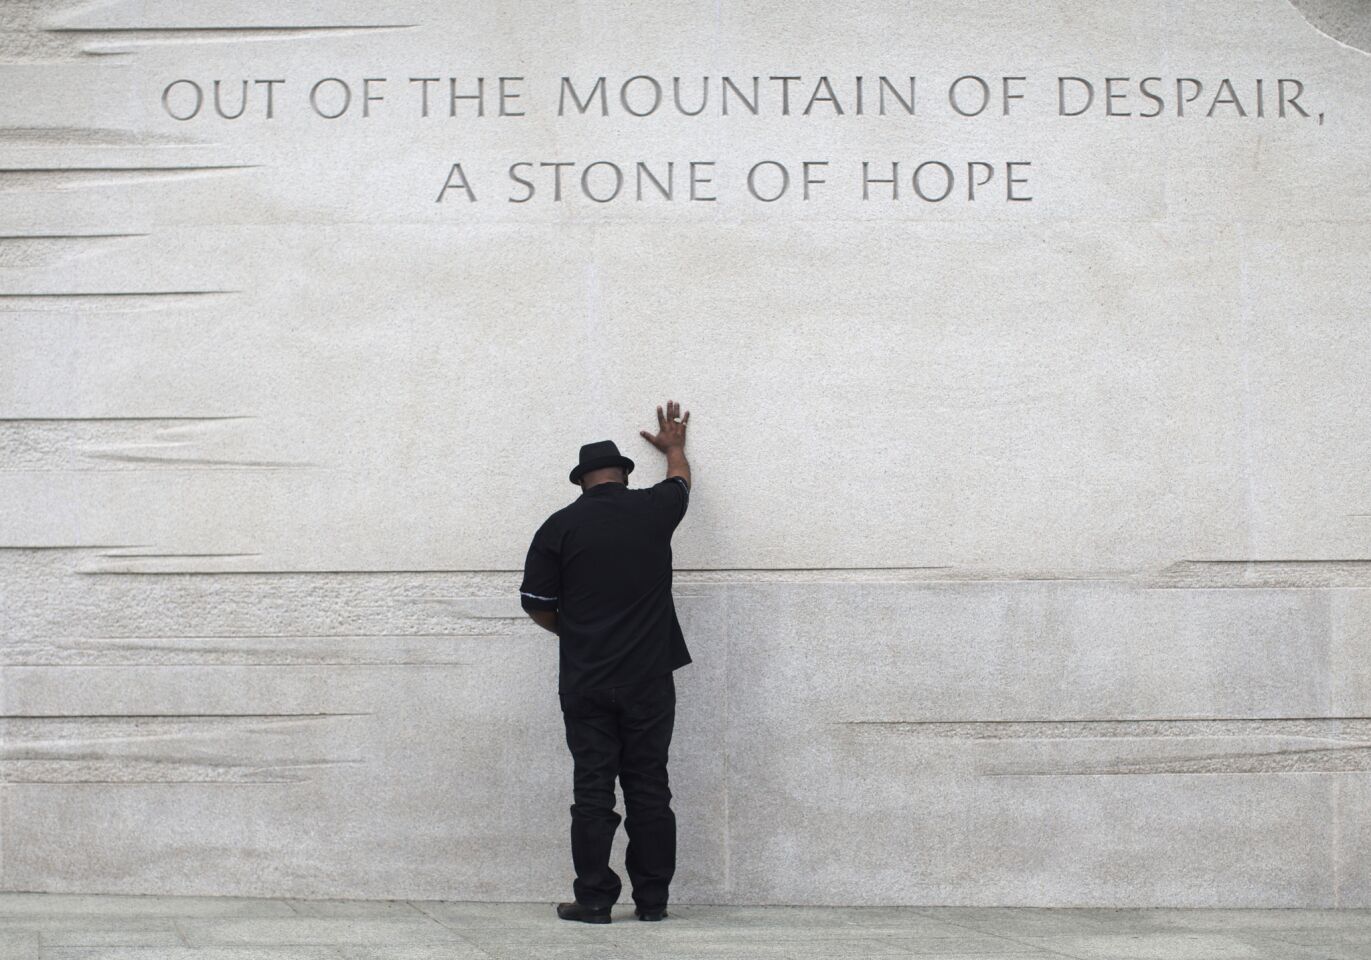 Rev. Bobby Turner of Columbus, Ohio, places his hand on the Martin Luther King Jr. Memorial in Washington. 2013 marked the 50th anniversary of King's March on Washington.